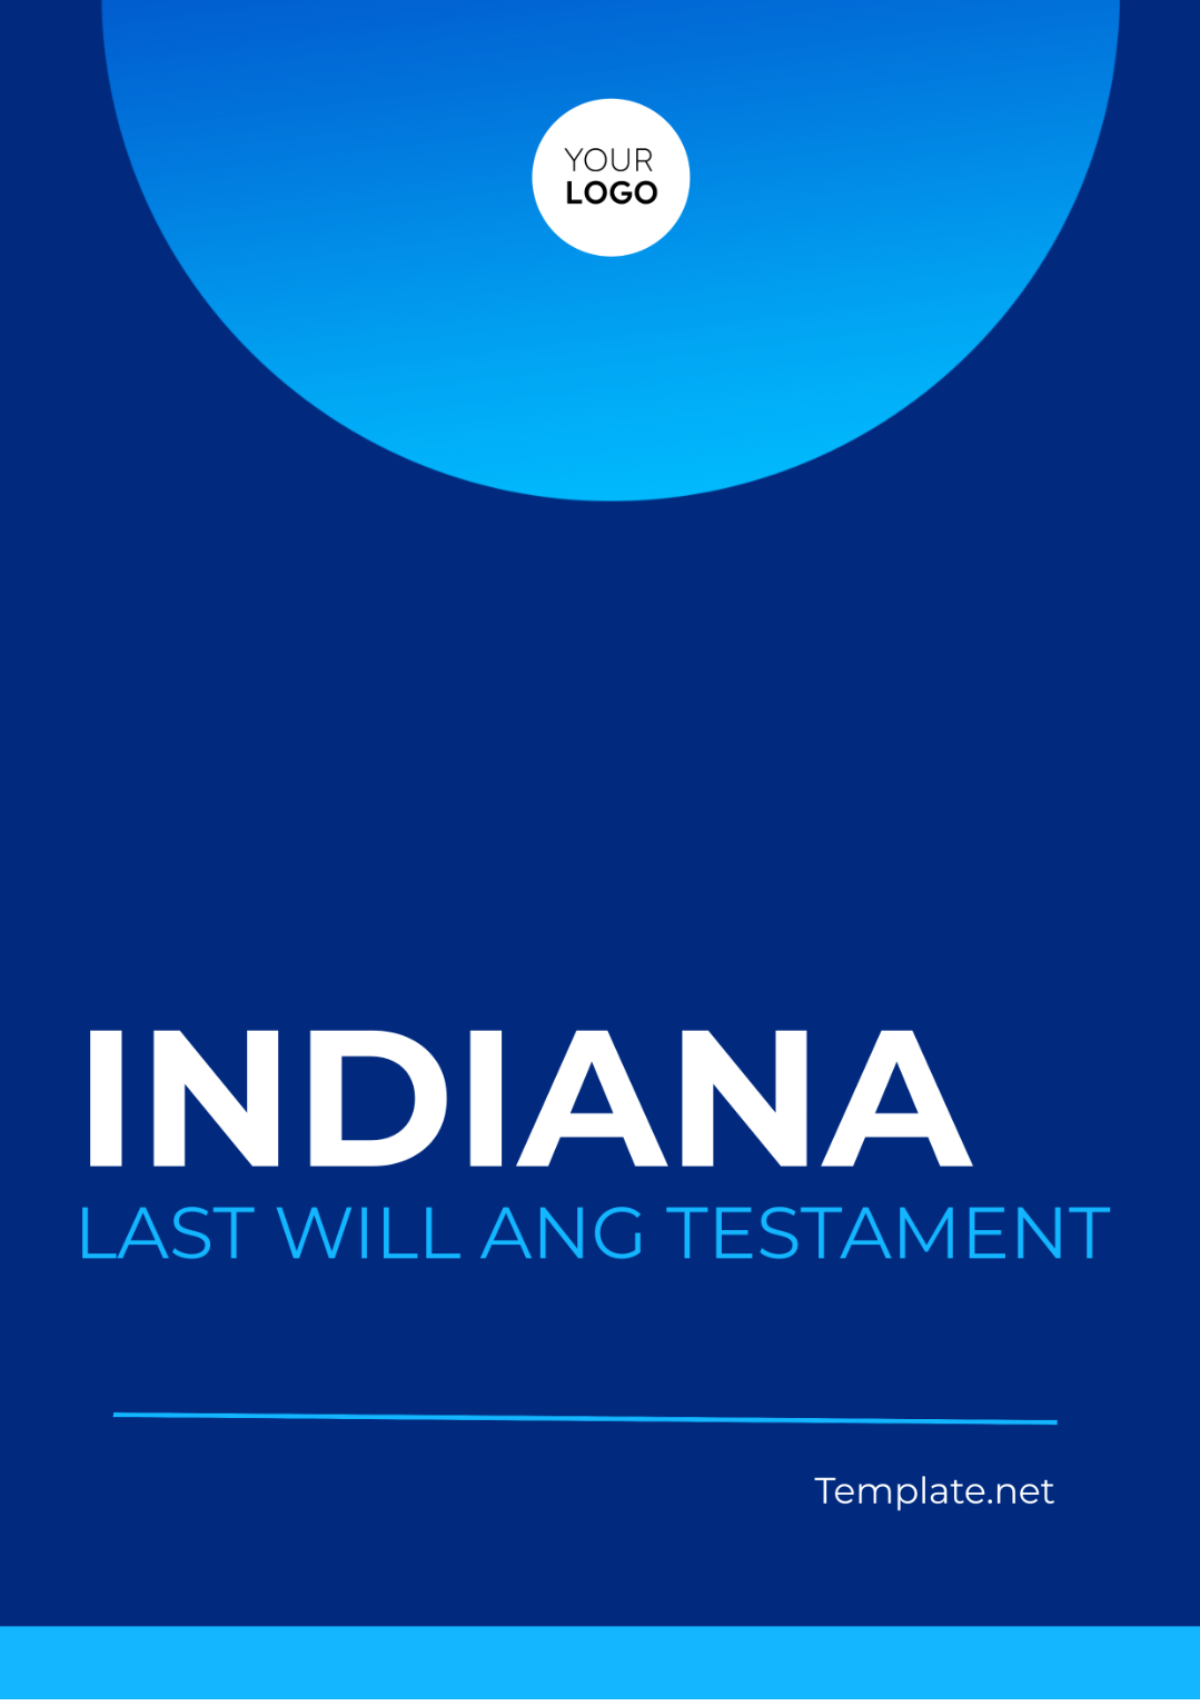 Indiana Last Will and Testament Template